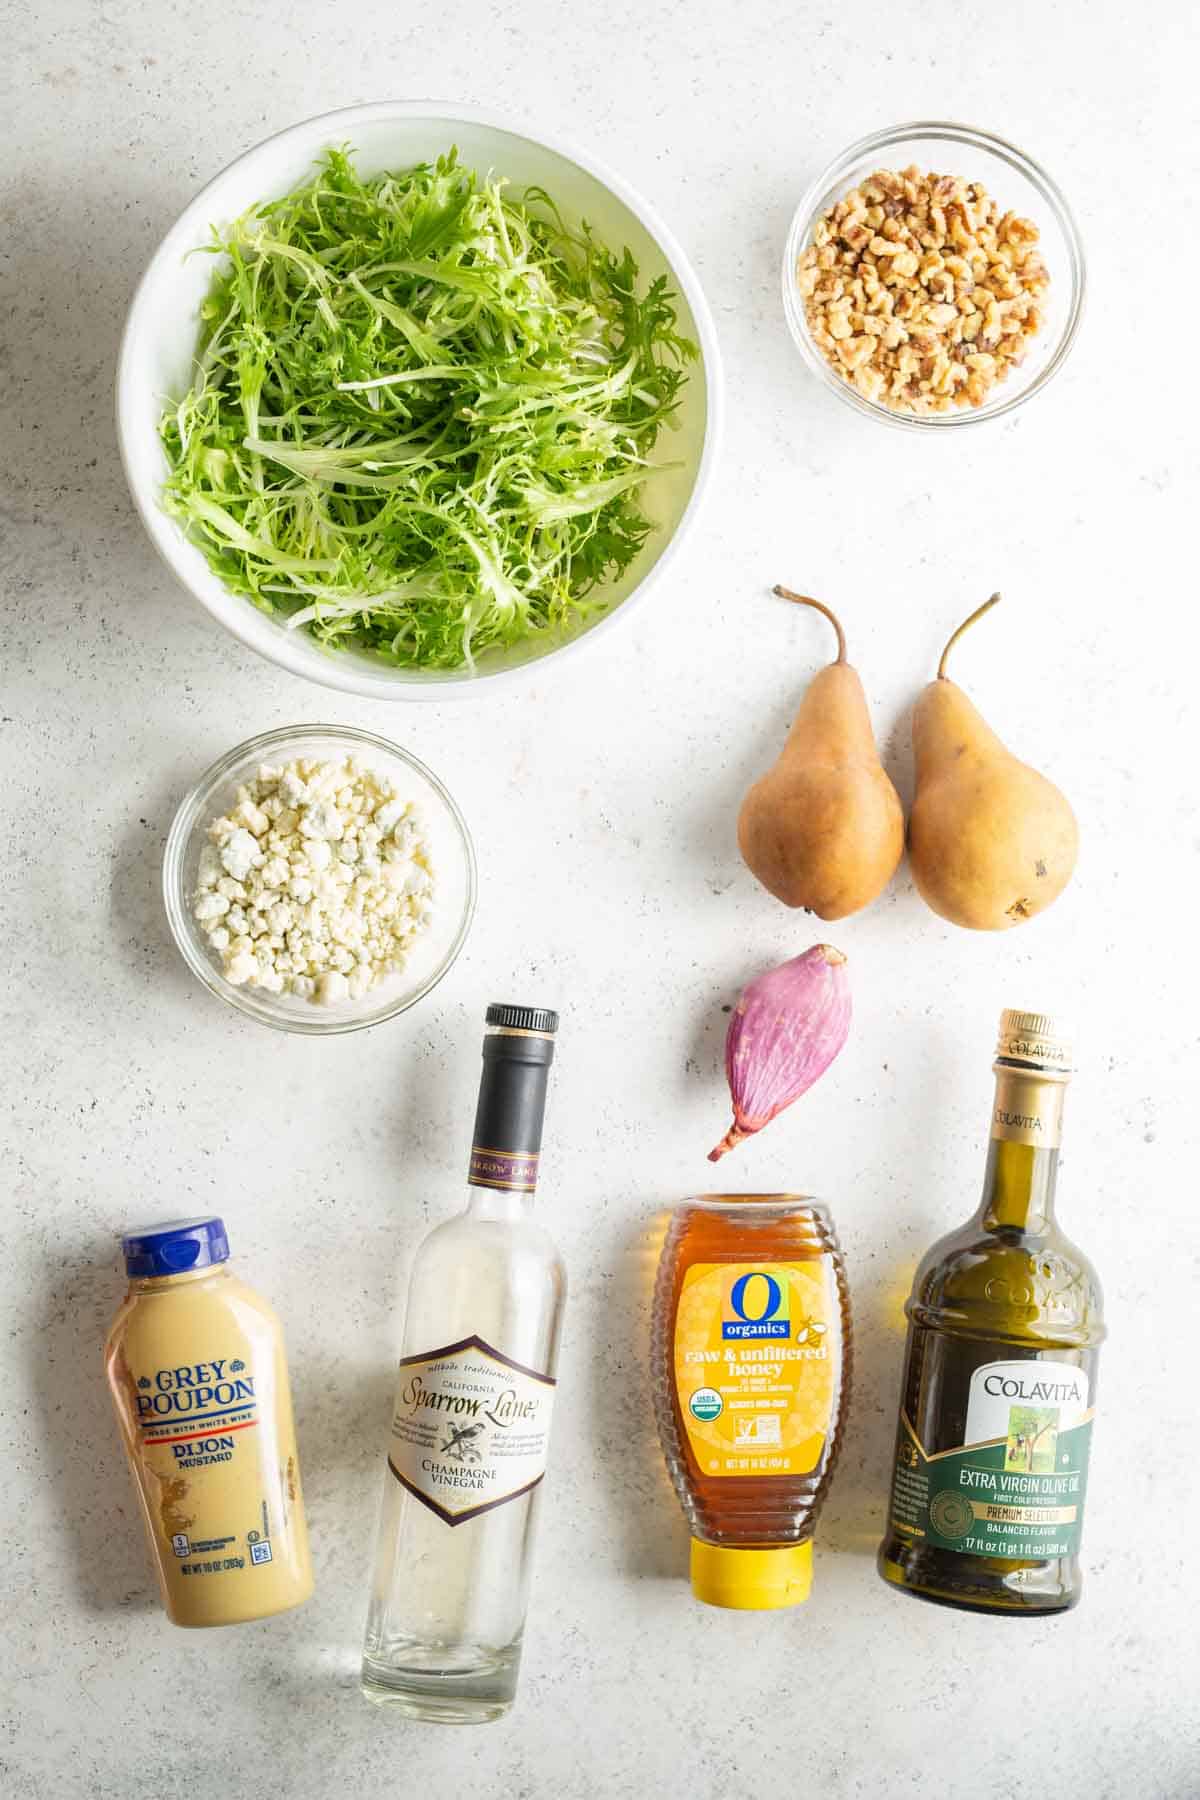 The ingredients for a salad are laid out on a table.